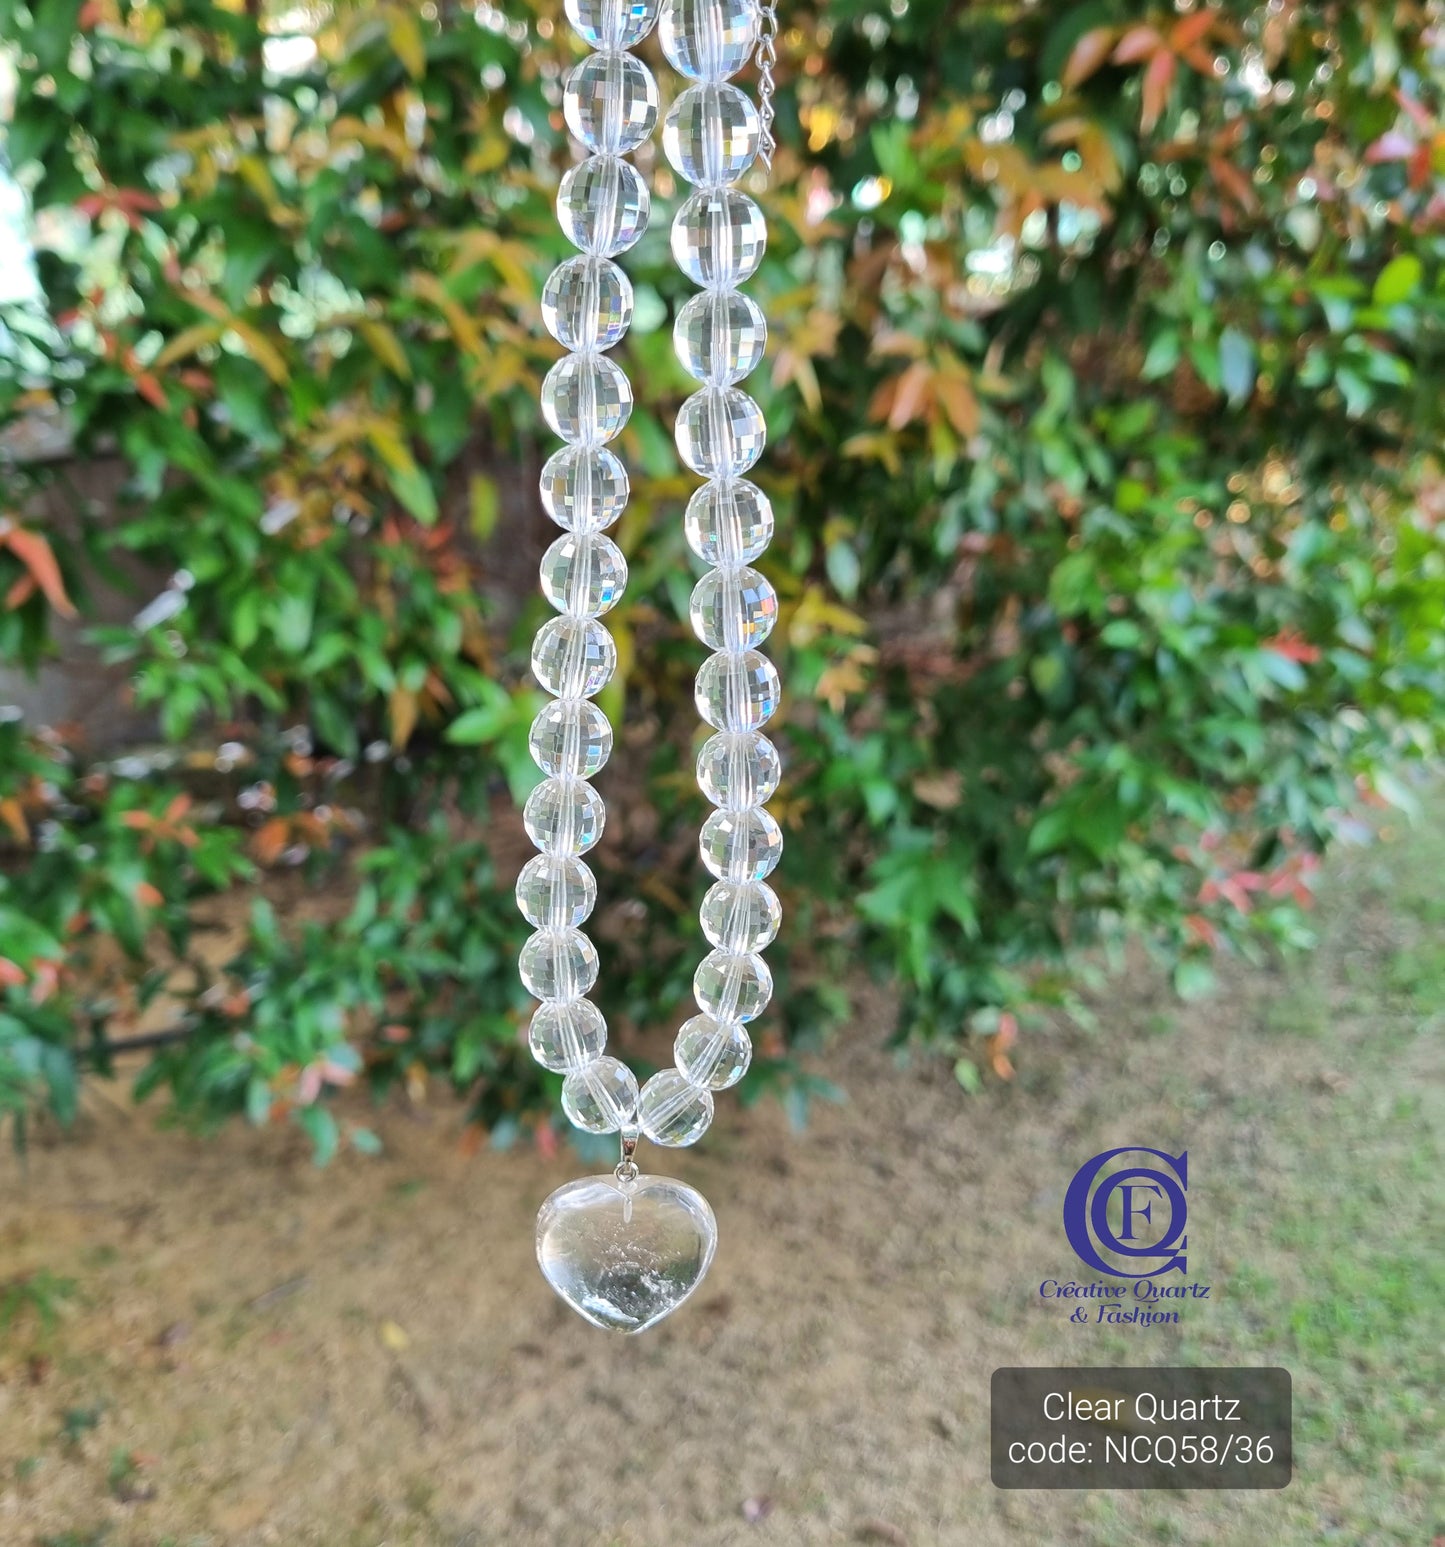 CLEAR QUARTZ NECKLACE WITH HEART SHAPE PENDANT (Pre-order required)